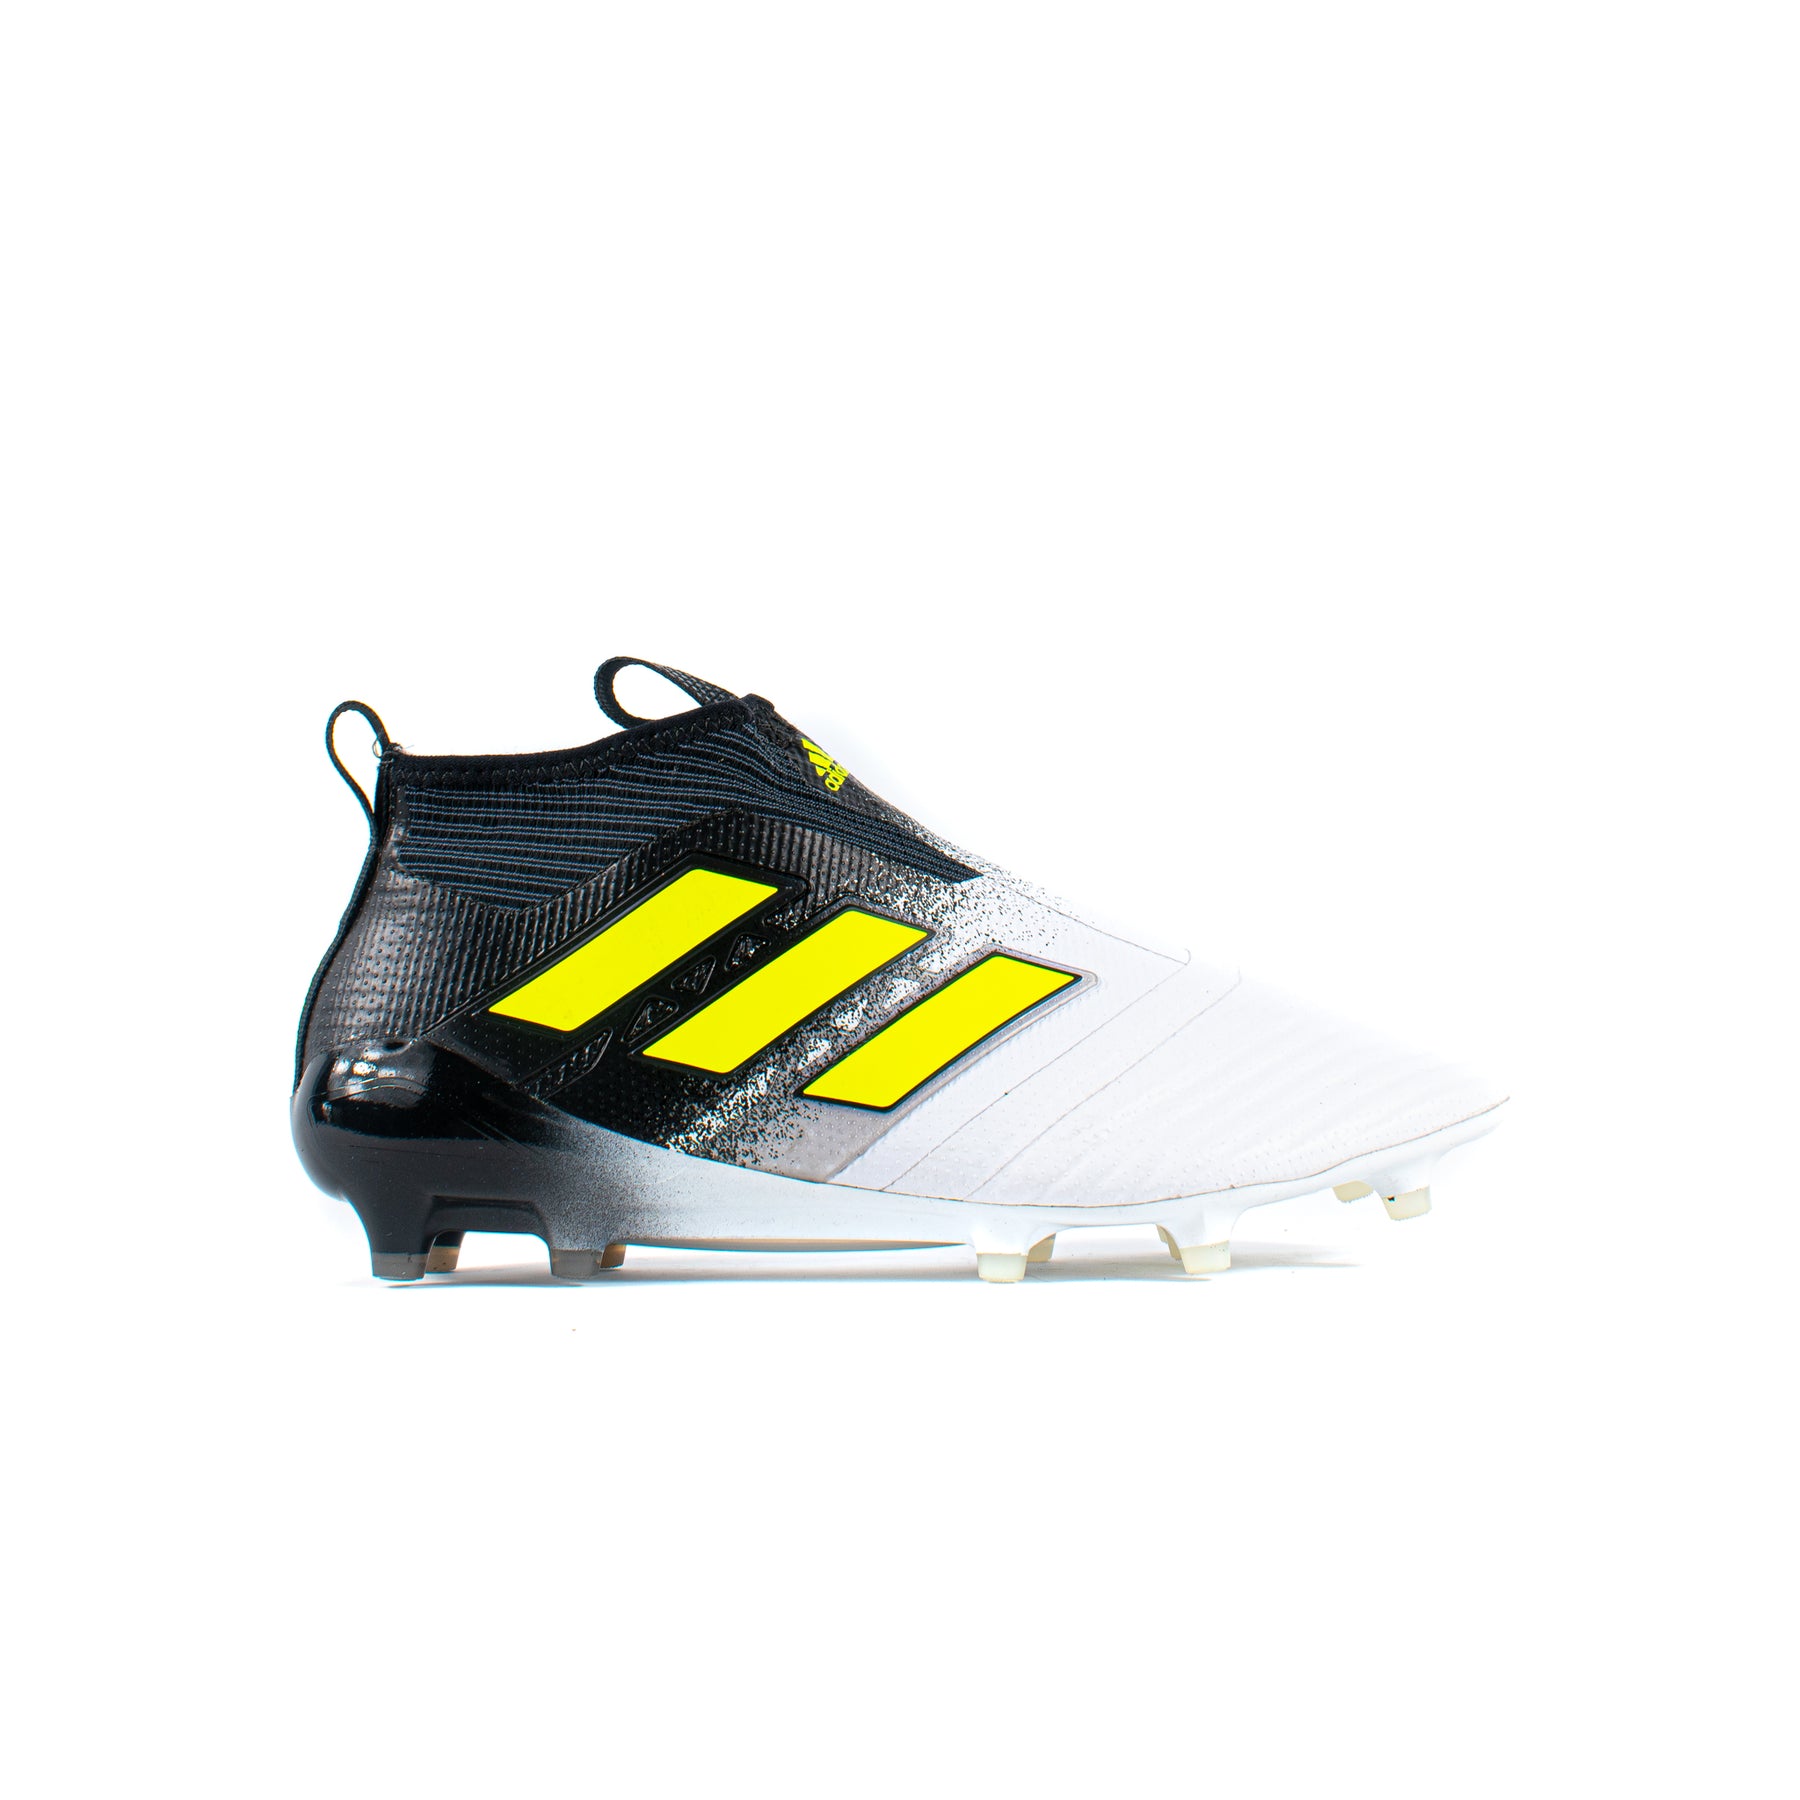 Adidas Ace 17+ White FG – Classic Soccer Cleats